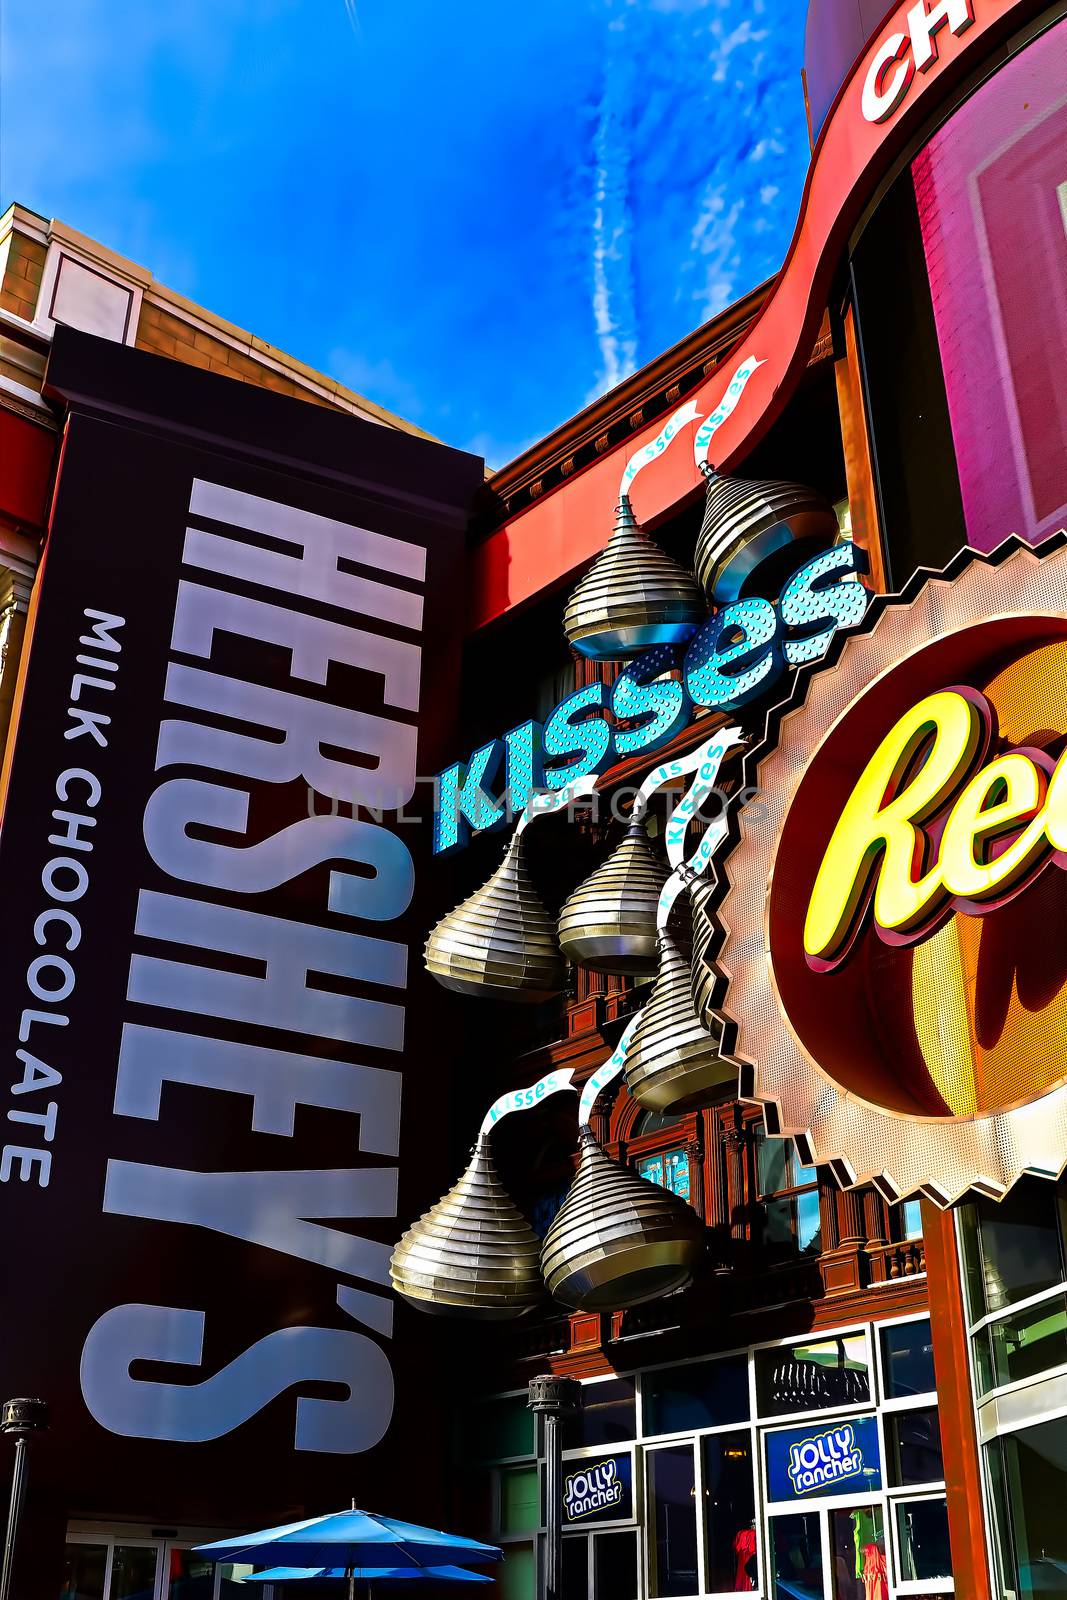 Las Vegas, NV/USA - Oct 09, 2016 : Exterior of the Hershey's Chocolate World in Las Vegas. The 13,000 sq ft store has over 800 different chocolates. by USA-TARO